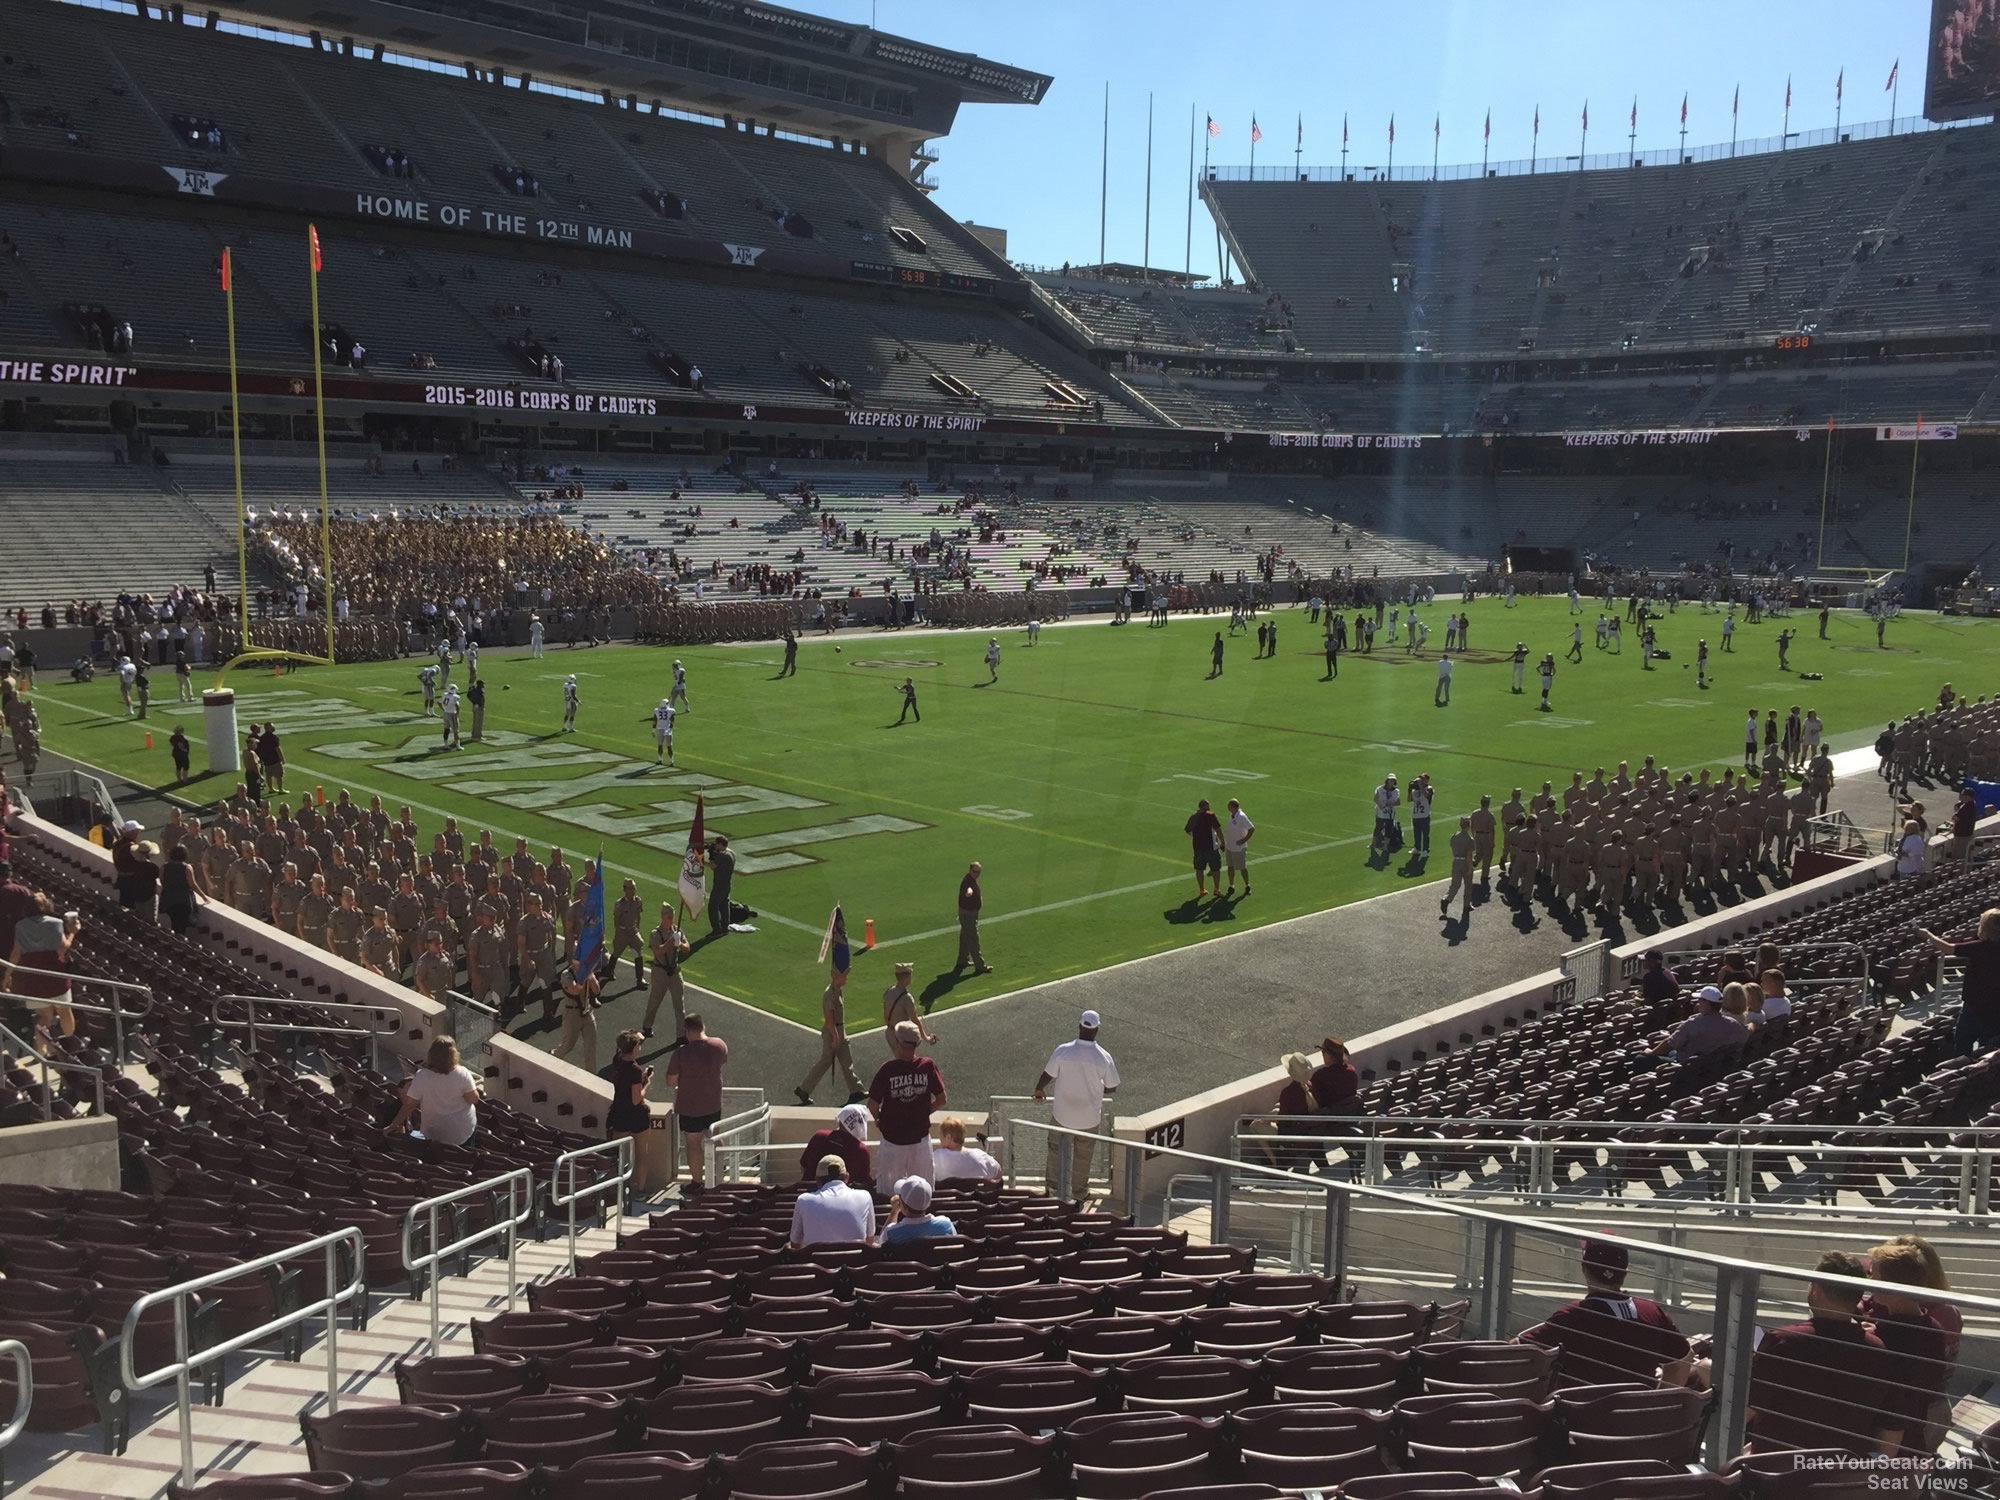 section 114, row 20 seat view  - kyle field